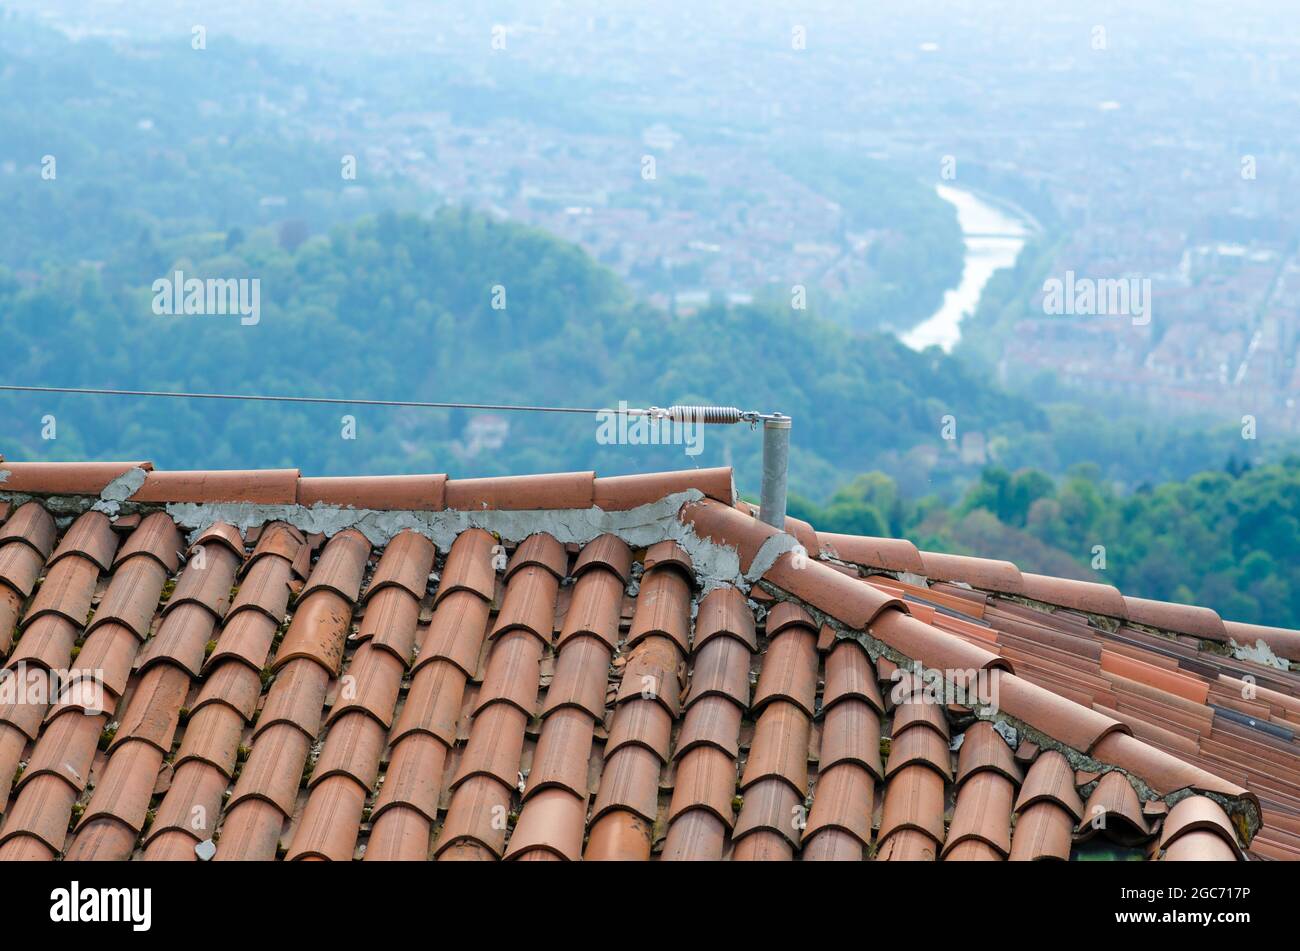 safety on construction sites: roof with lifeline and brick tiles, safety  hook for those who work on the roof, on the upper pitch near the ridge  tiles Stock Photo - Alamy